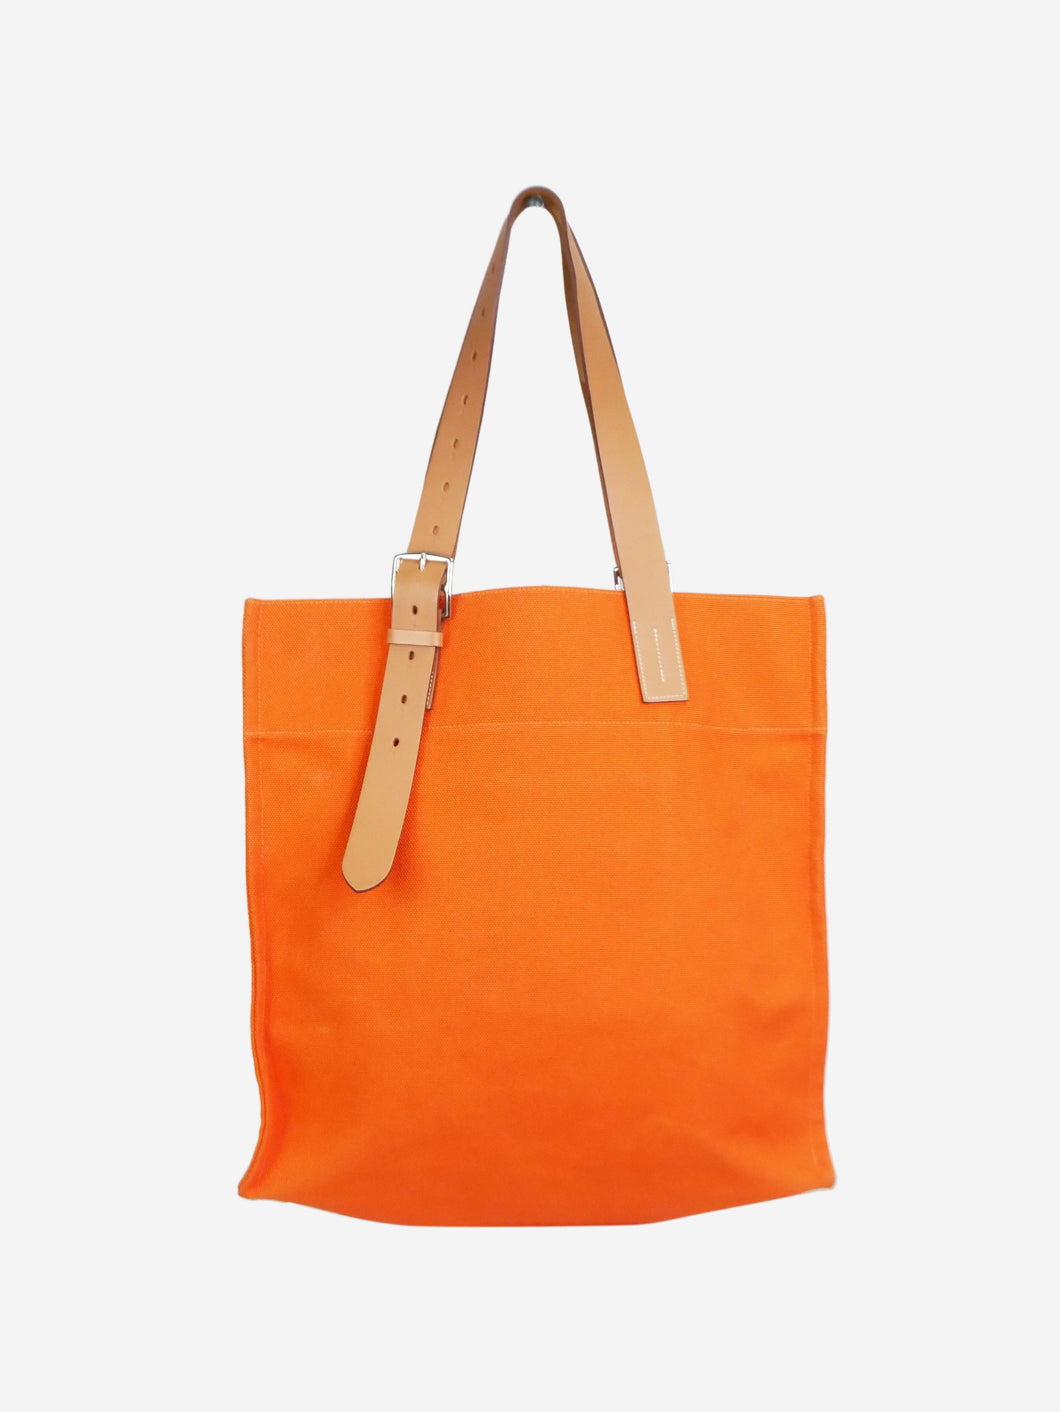 Orange 2013 canvas tote with silver hardware and top leather handles Tote Bags Hermes 